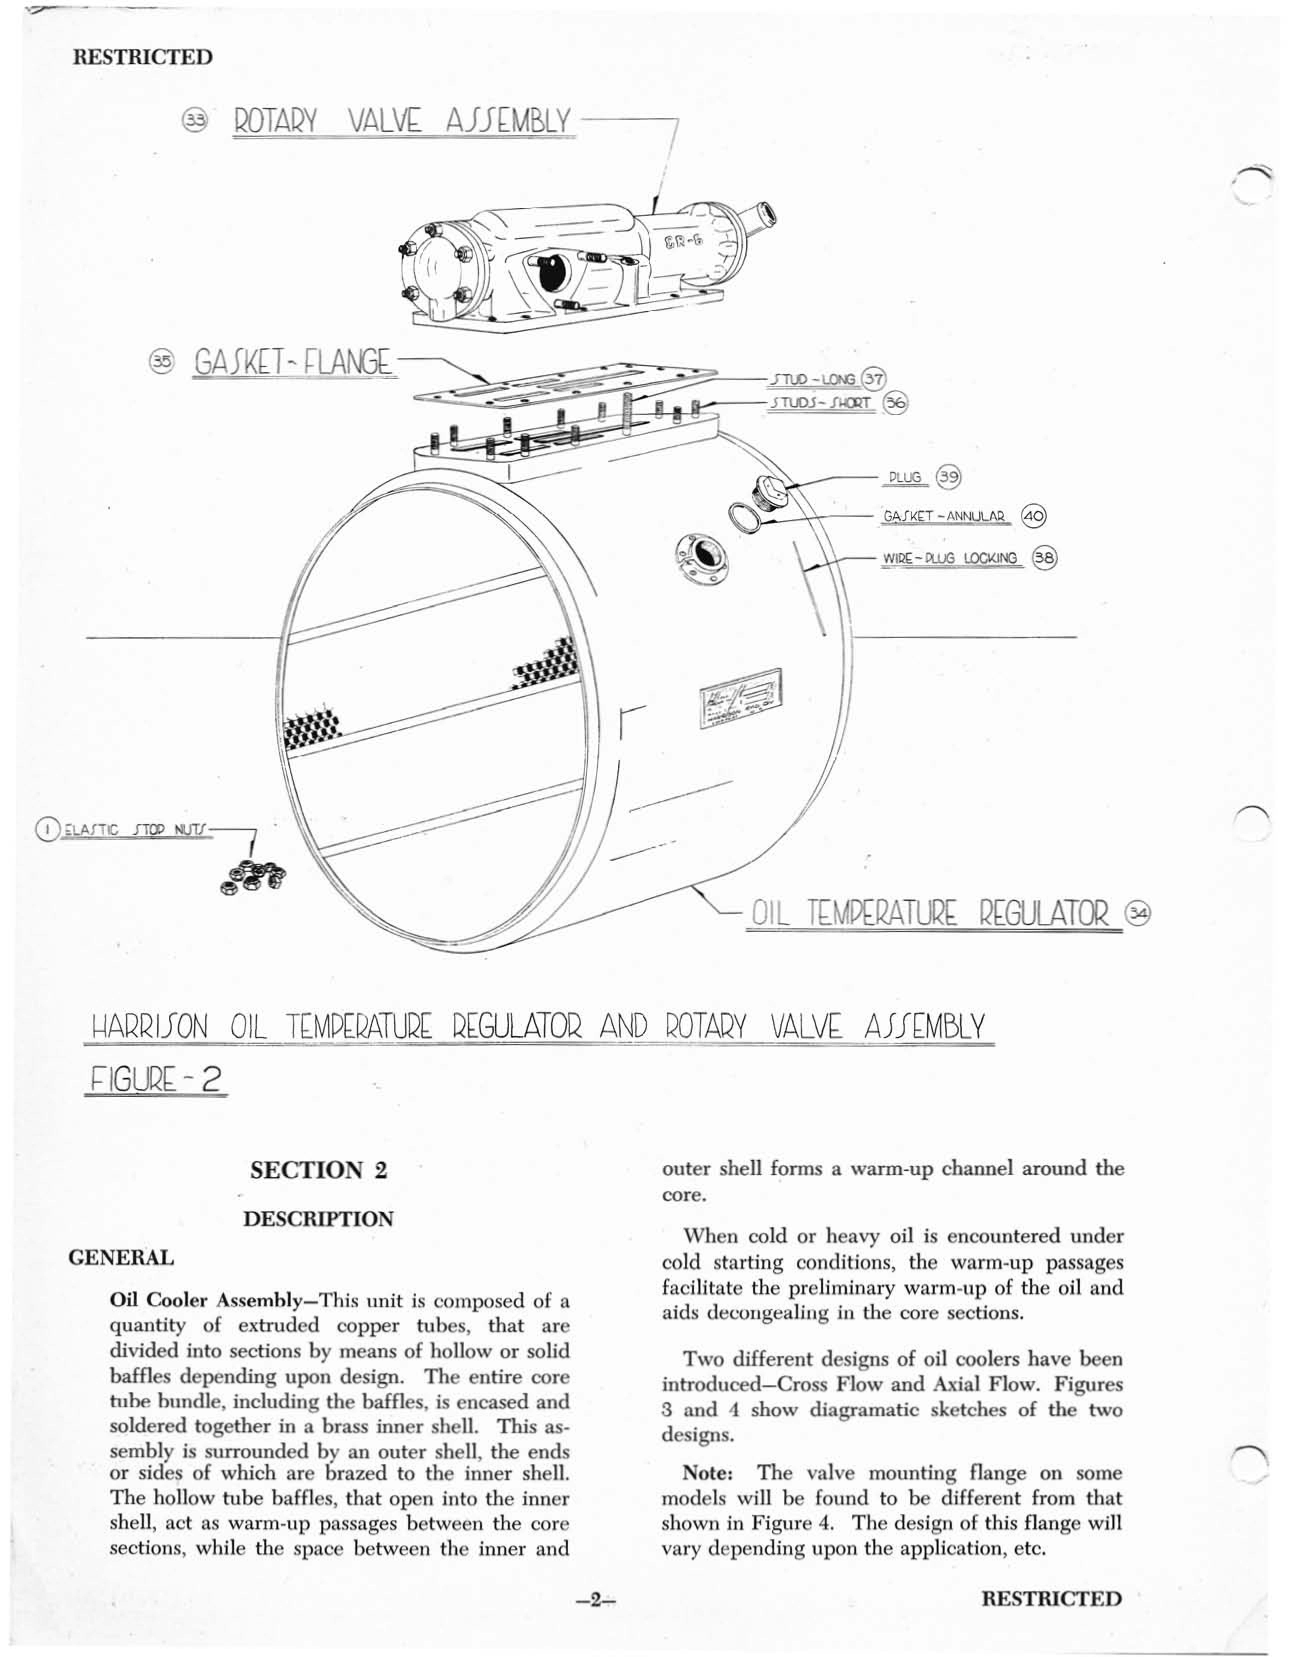 Sample page 5 from AirCorps Library document: Service Manual for Harrison Oil Coolers and Valves